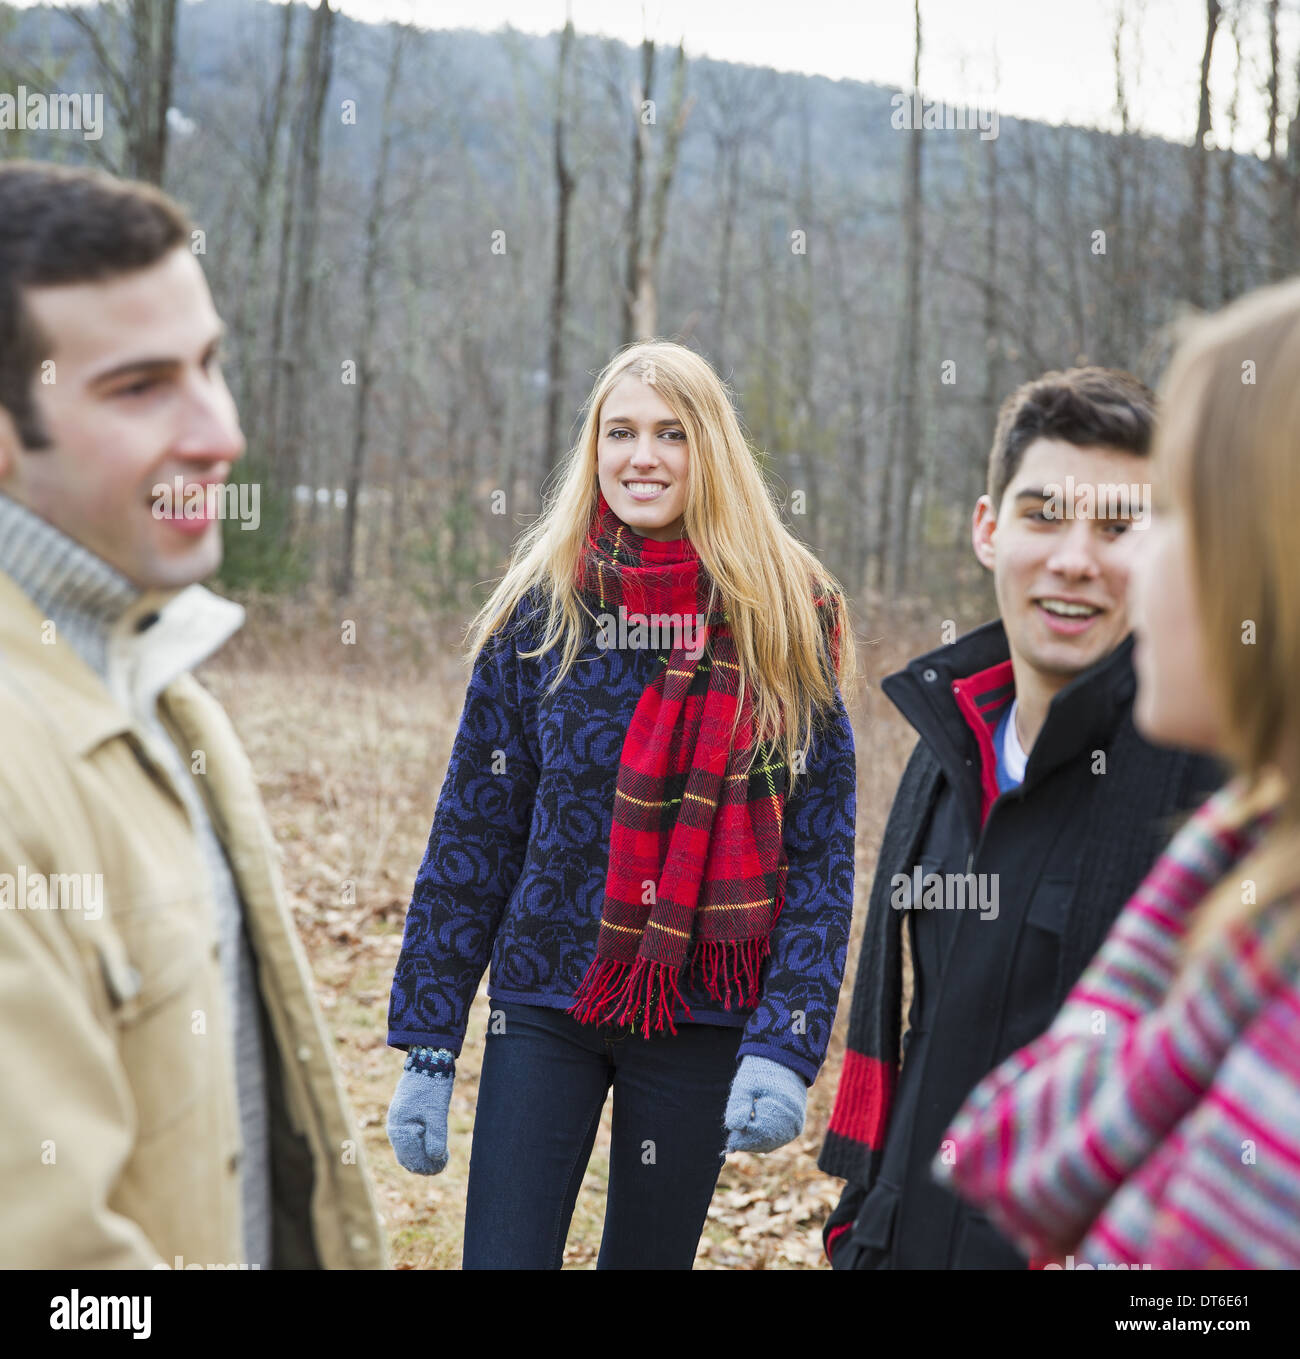 A group of four people outdoors on a winter day. Stock Photo